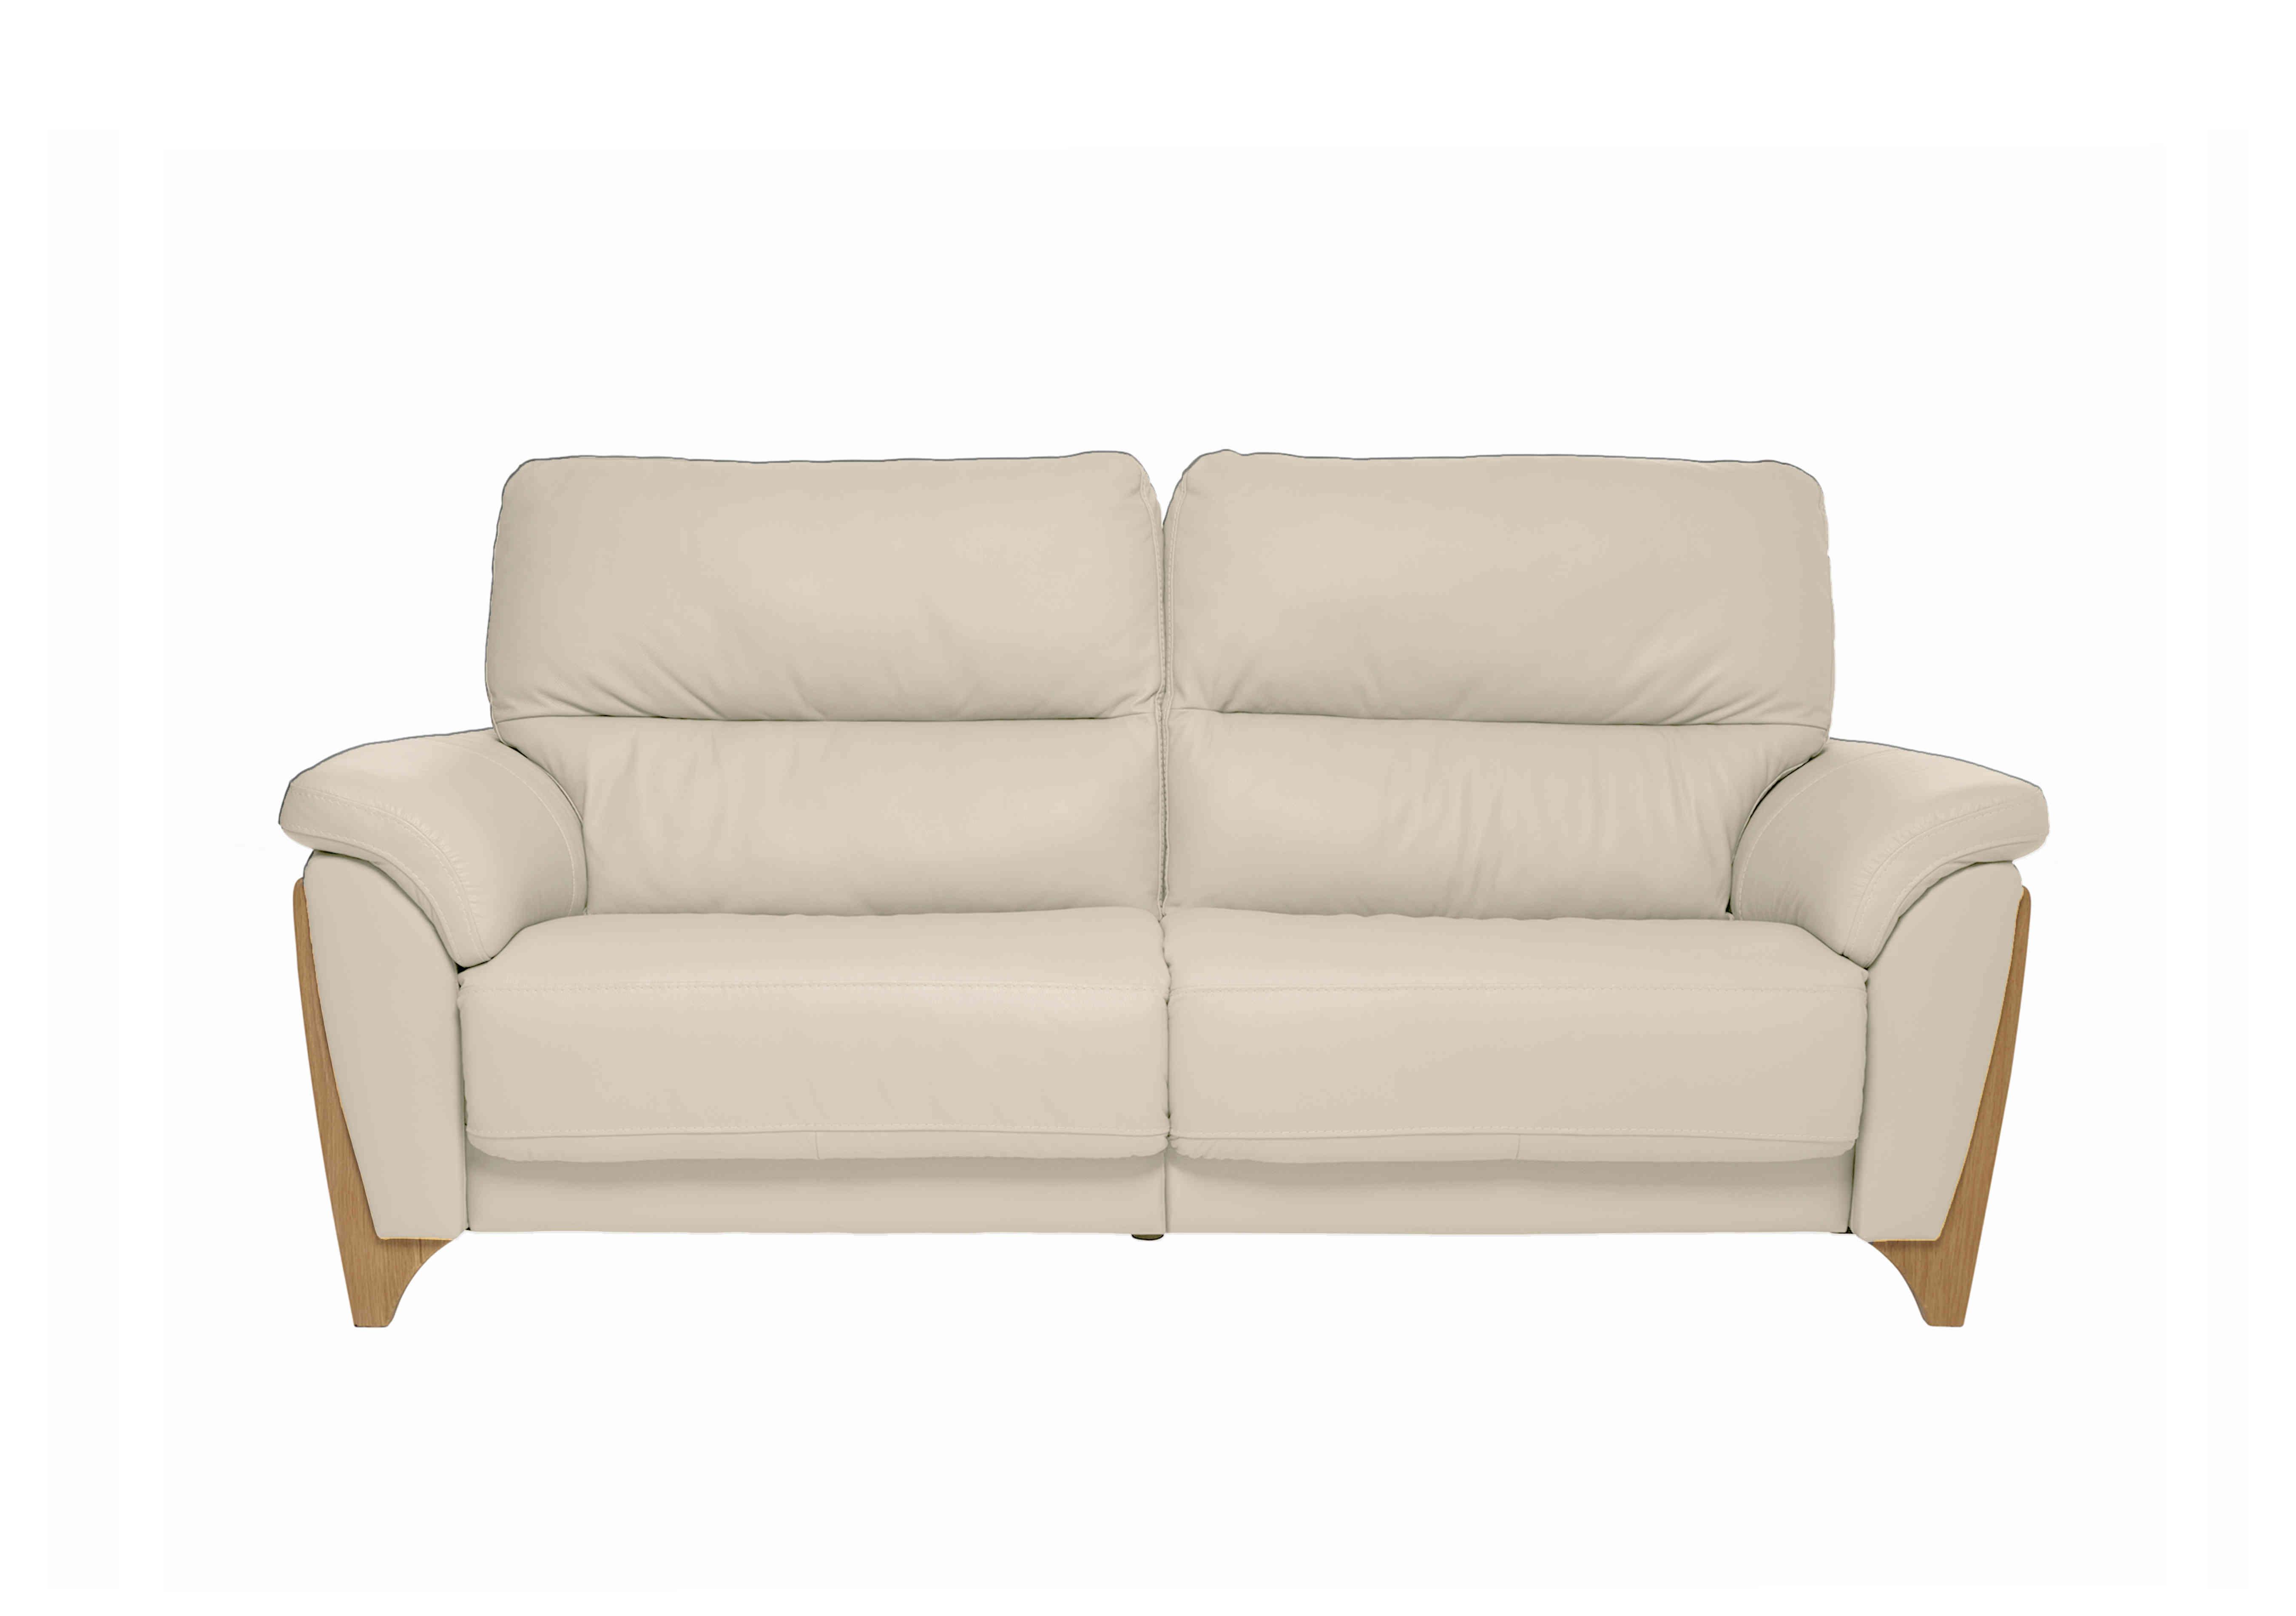 Enna Large Leather Power Recliner Sofa in L904 on Furniture Village